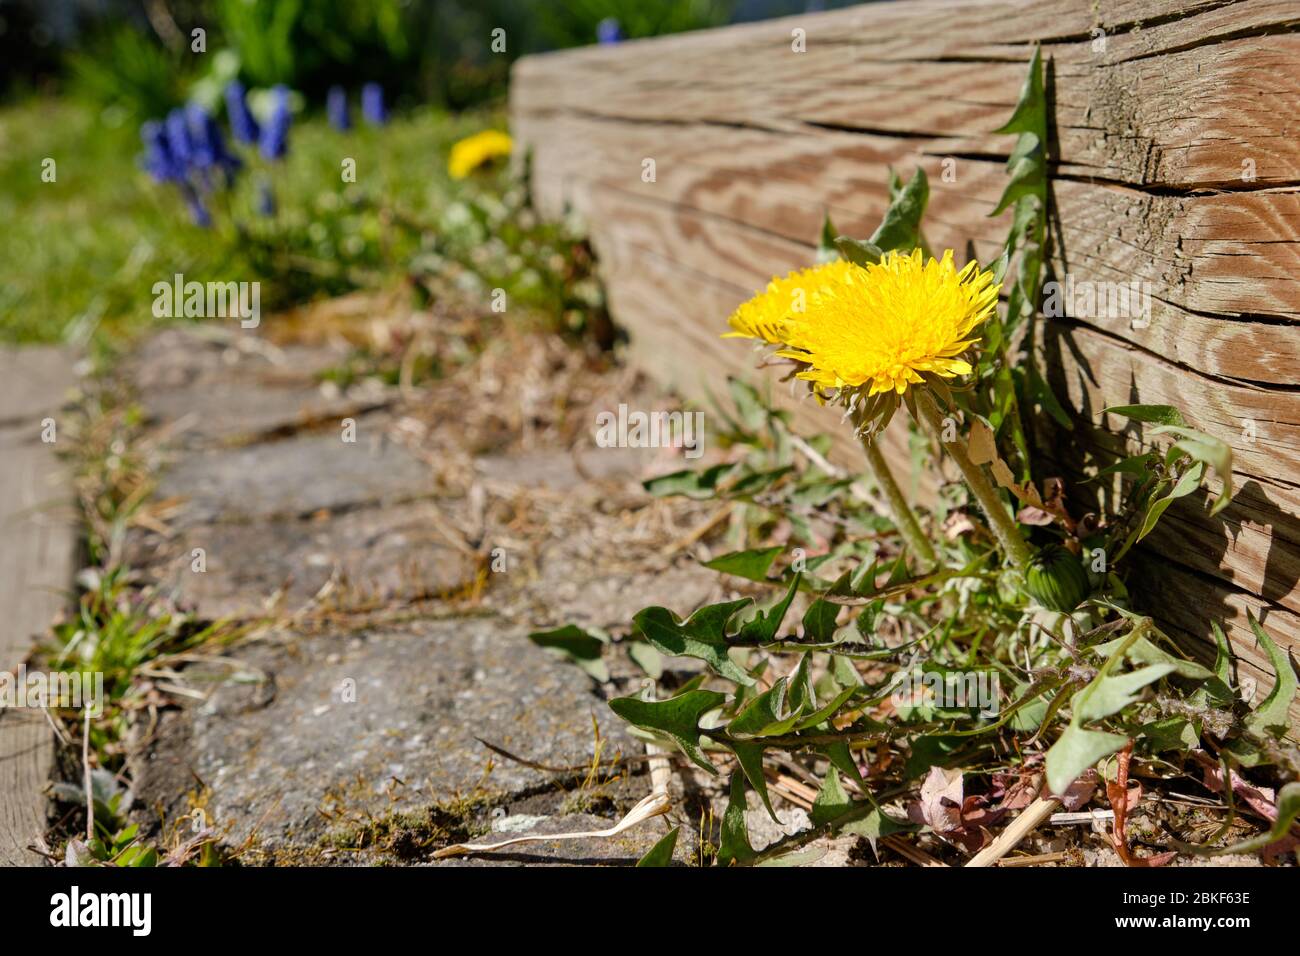 Beautiful yellow dandelion plant flowering at the wooden bar of stairs in a springtime garden. Seen in Germany in April. Stock Photo